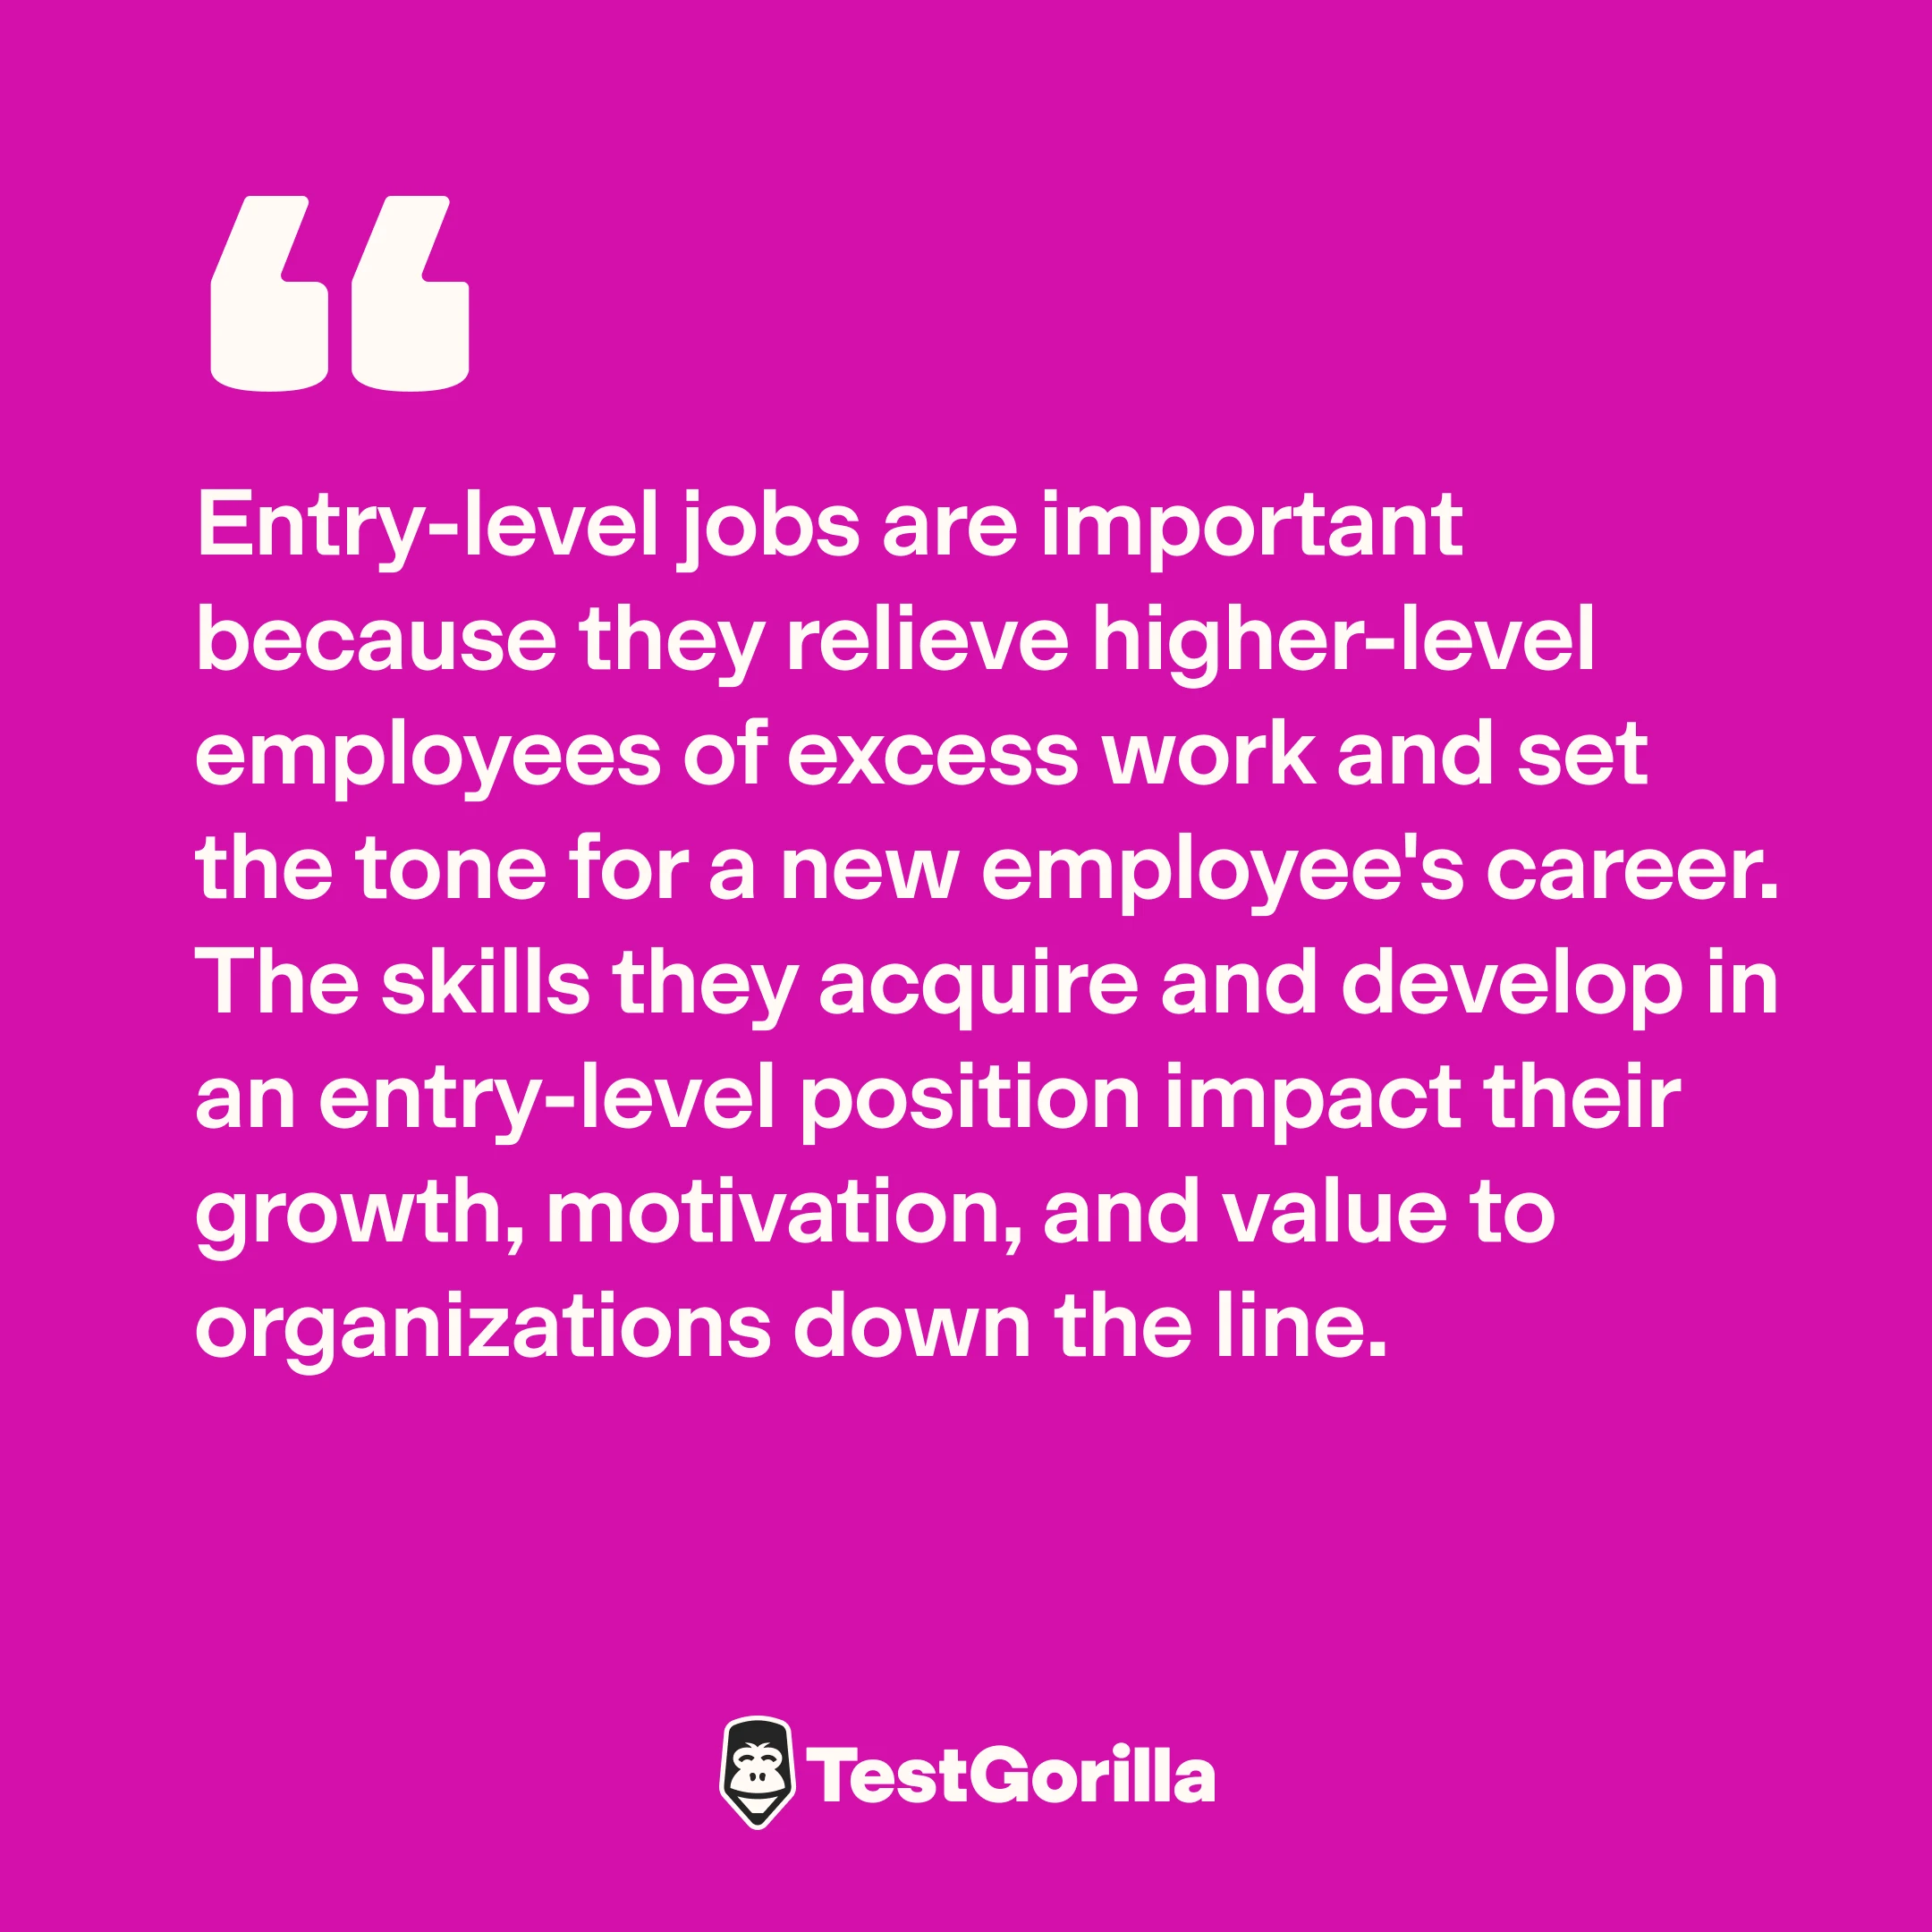 Entry-level jobs set the tone for new employees